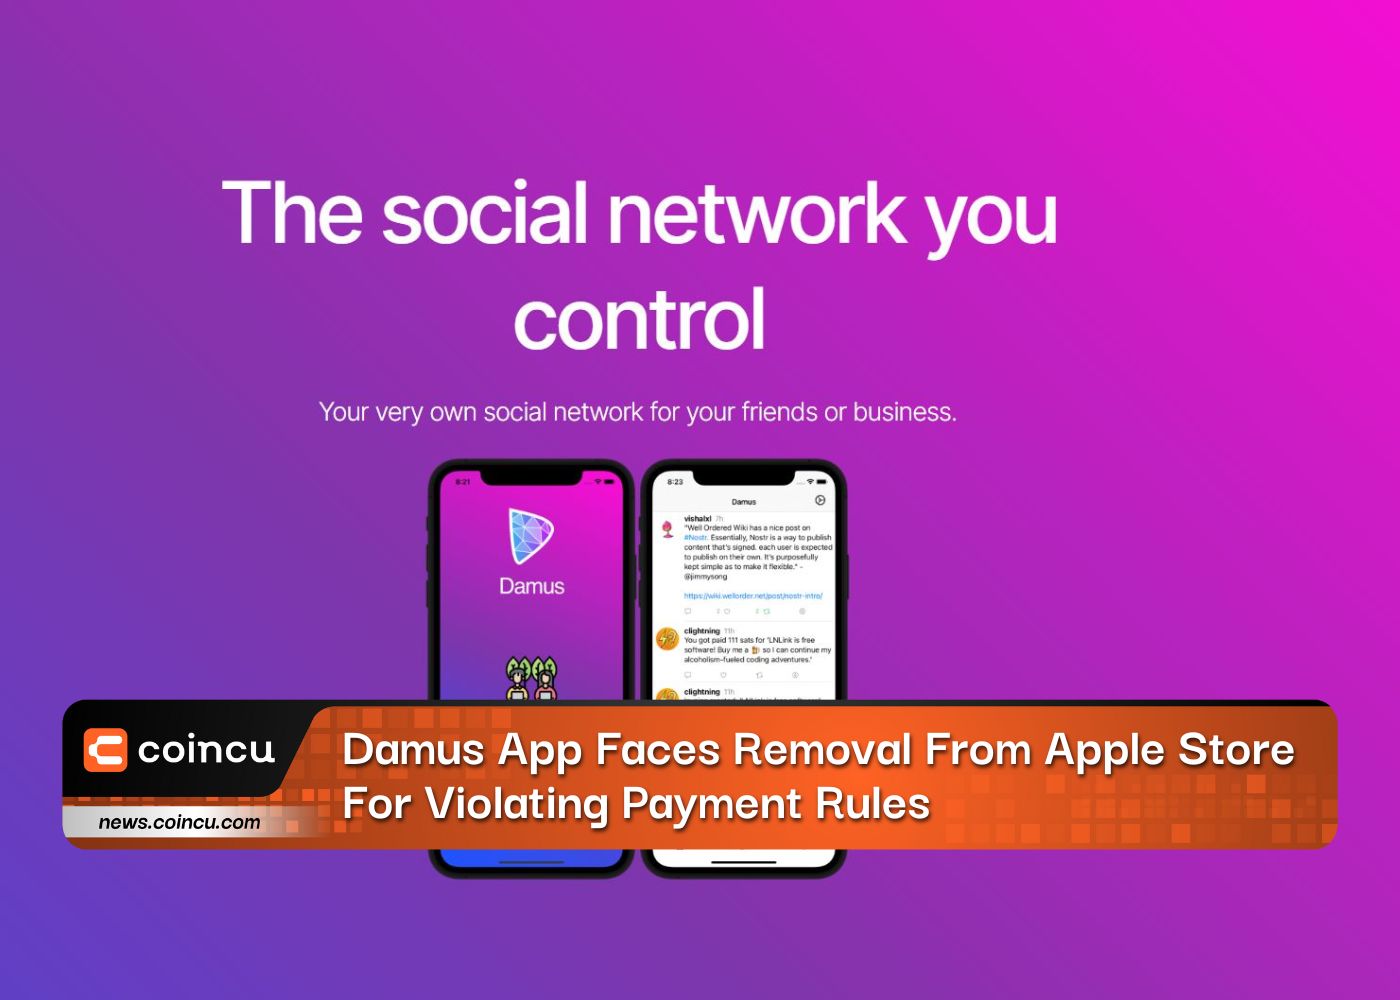 Damus App Faces Removal From Apple Store For Violating Payment Rules